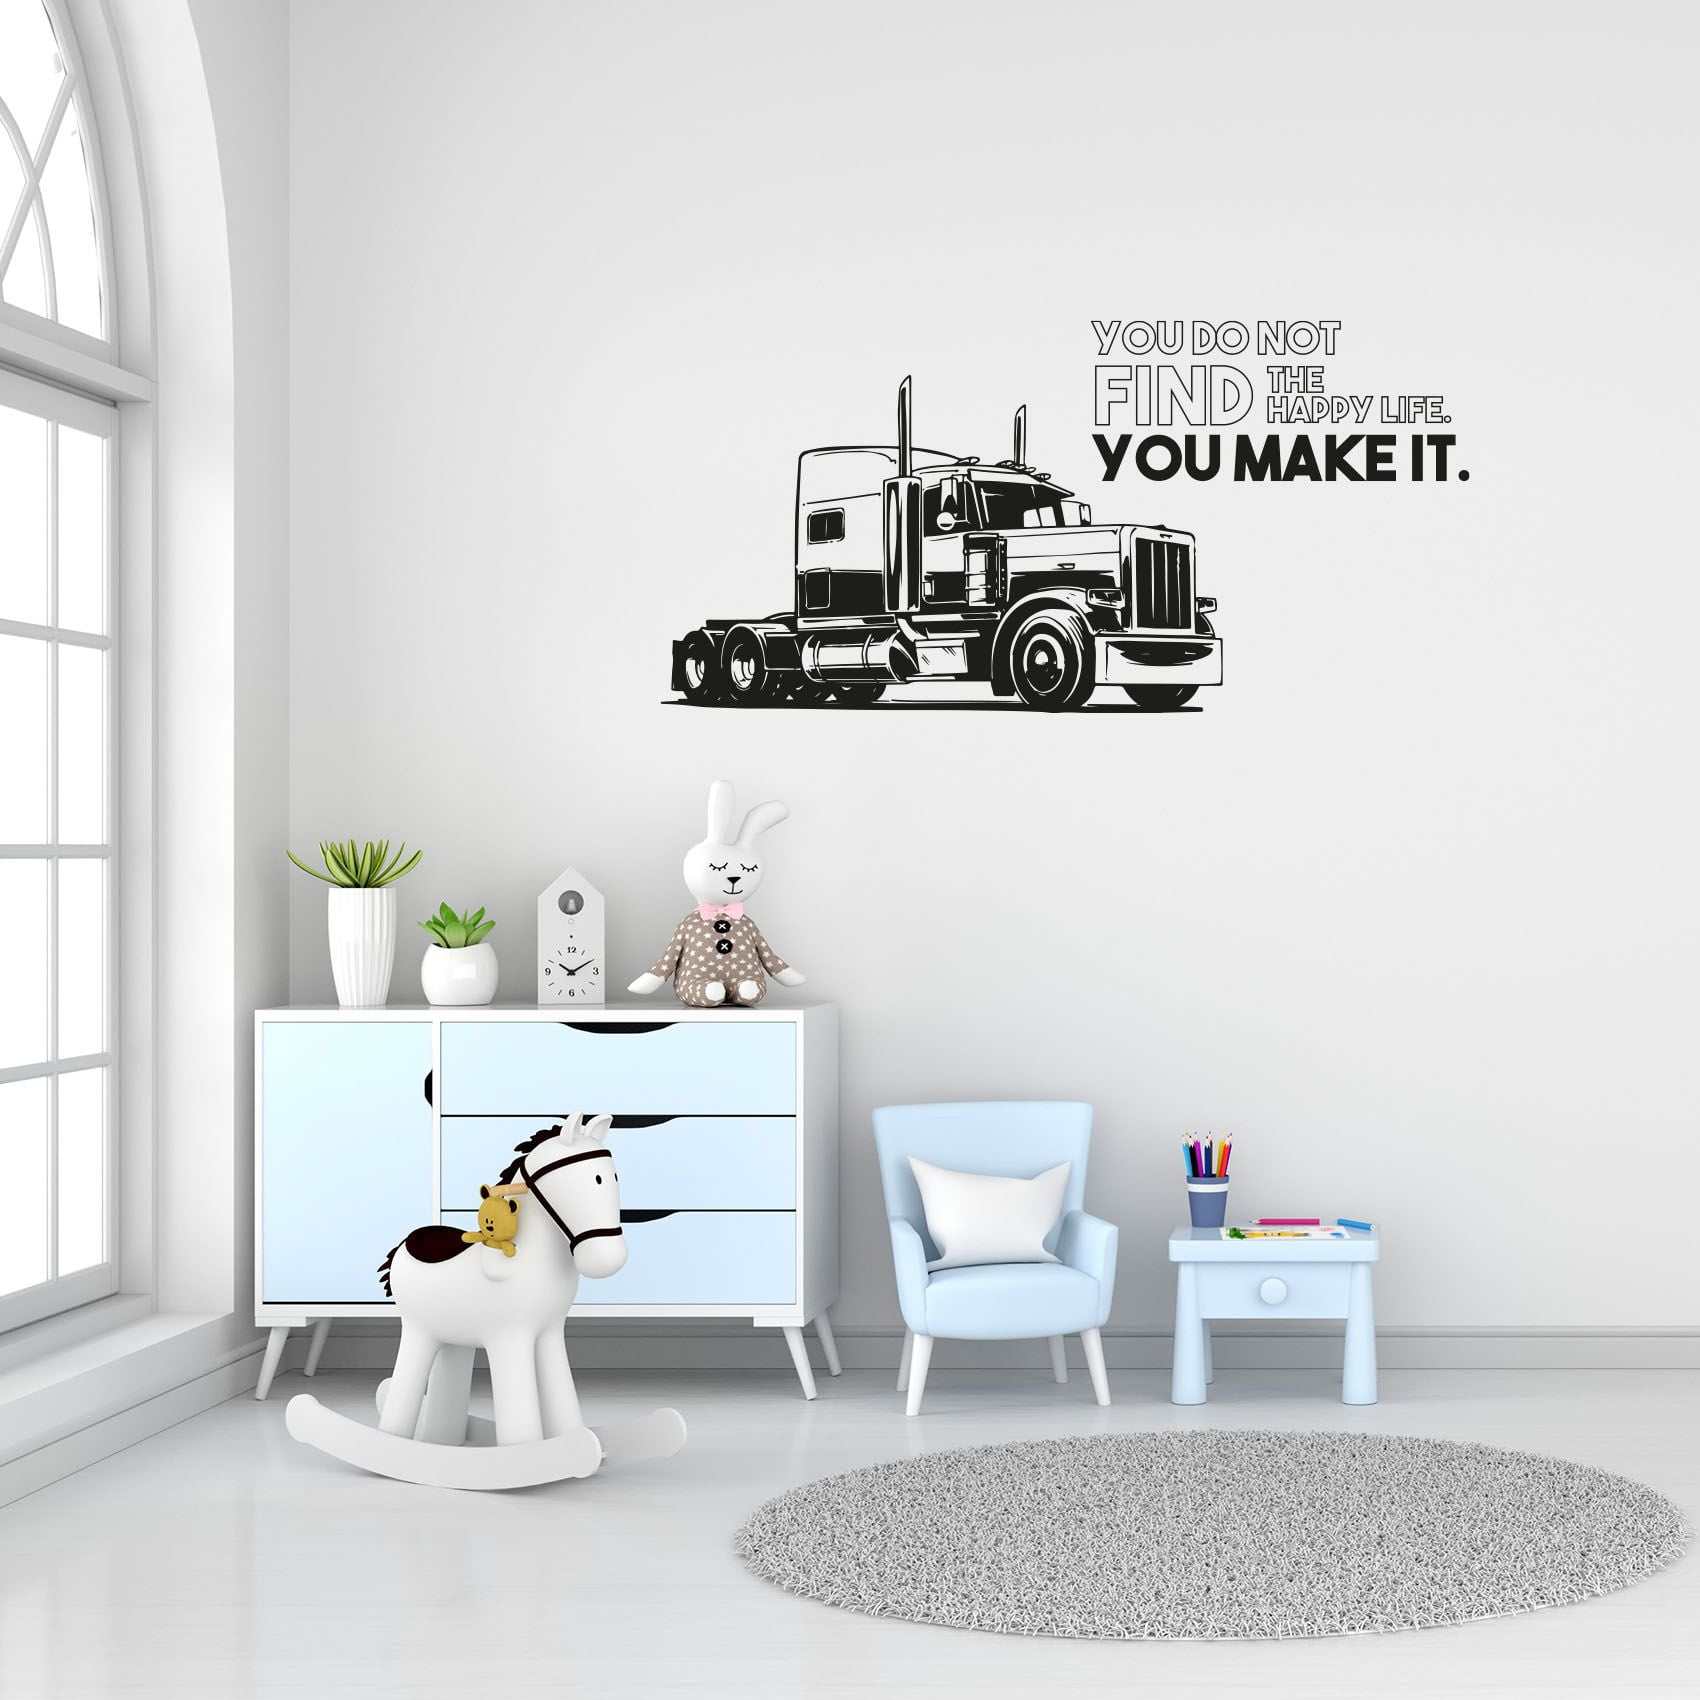 Happy Life Quote Truck Trucks Monster Truck Toy Car Wall Sticker ...